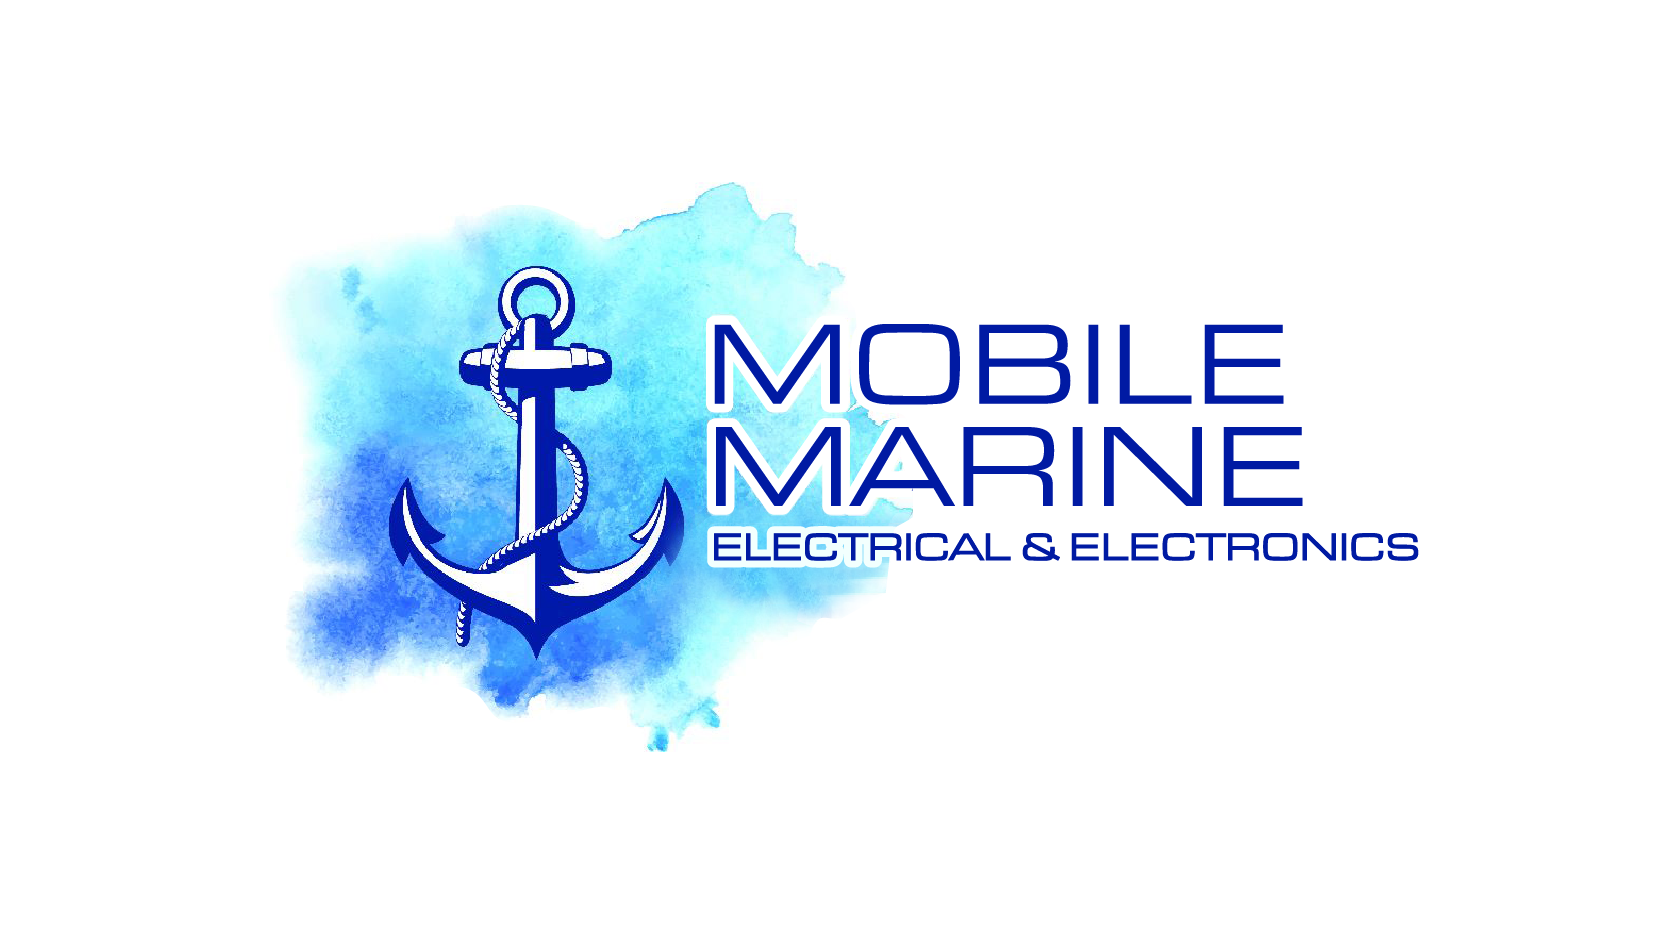 Mobile marine Electrical